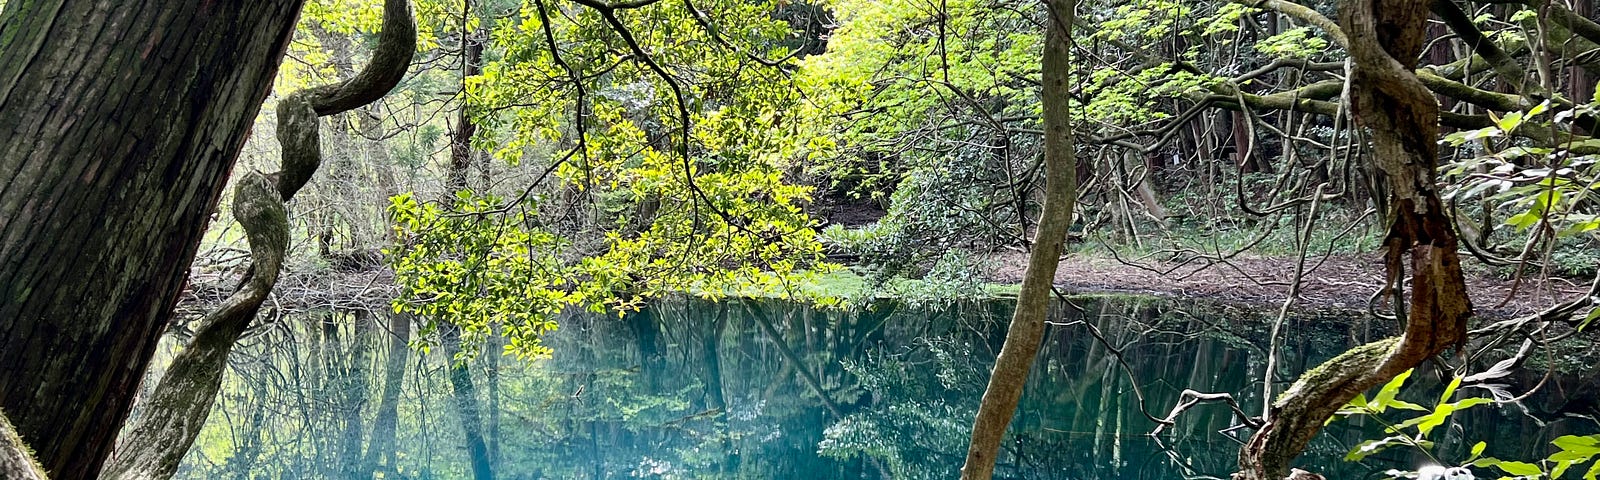 The blue-green waters of Maruike reflect the surrounding foliage.